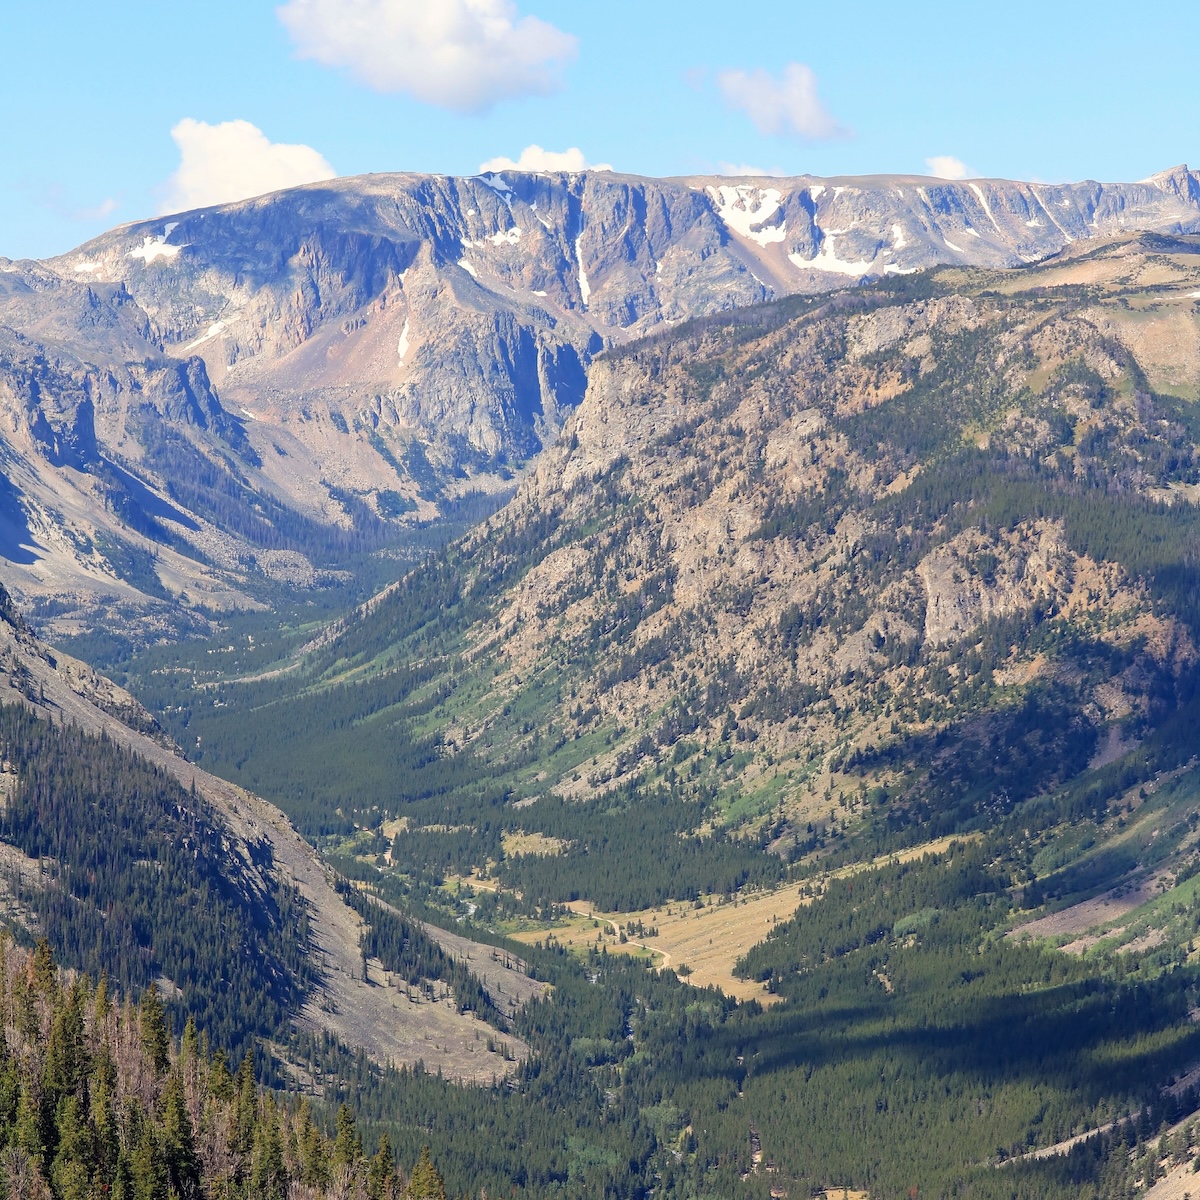 Beartooth Mountains and Custer National Forest along Montana's Beartooth Scenic Highway